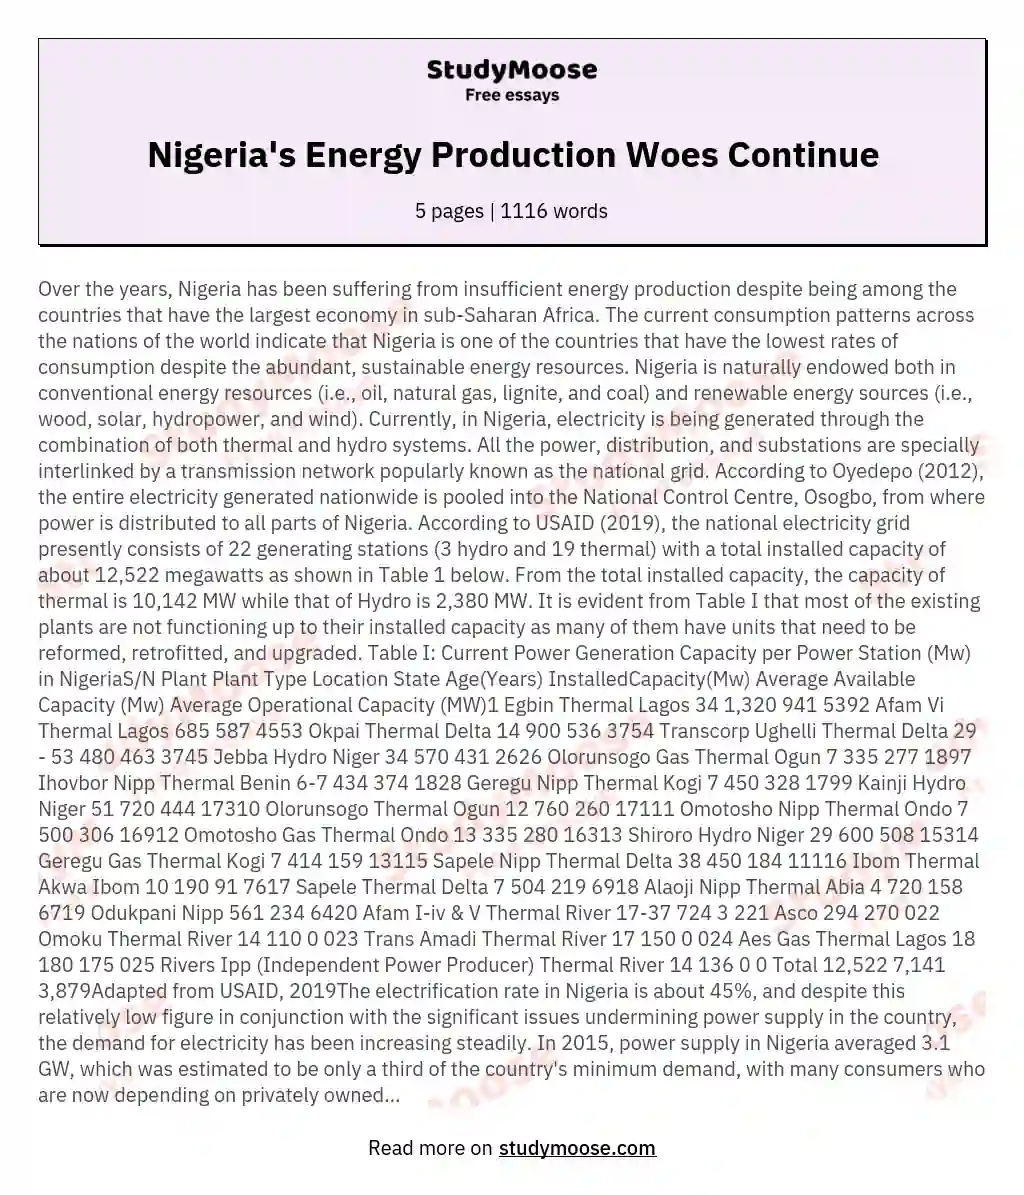 Nigeria's Energy Production Woes Continue